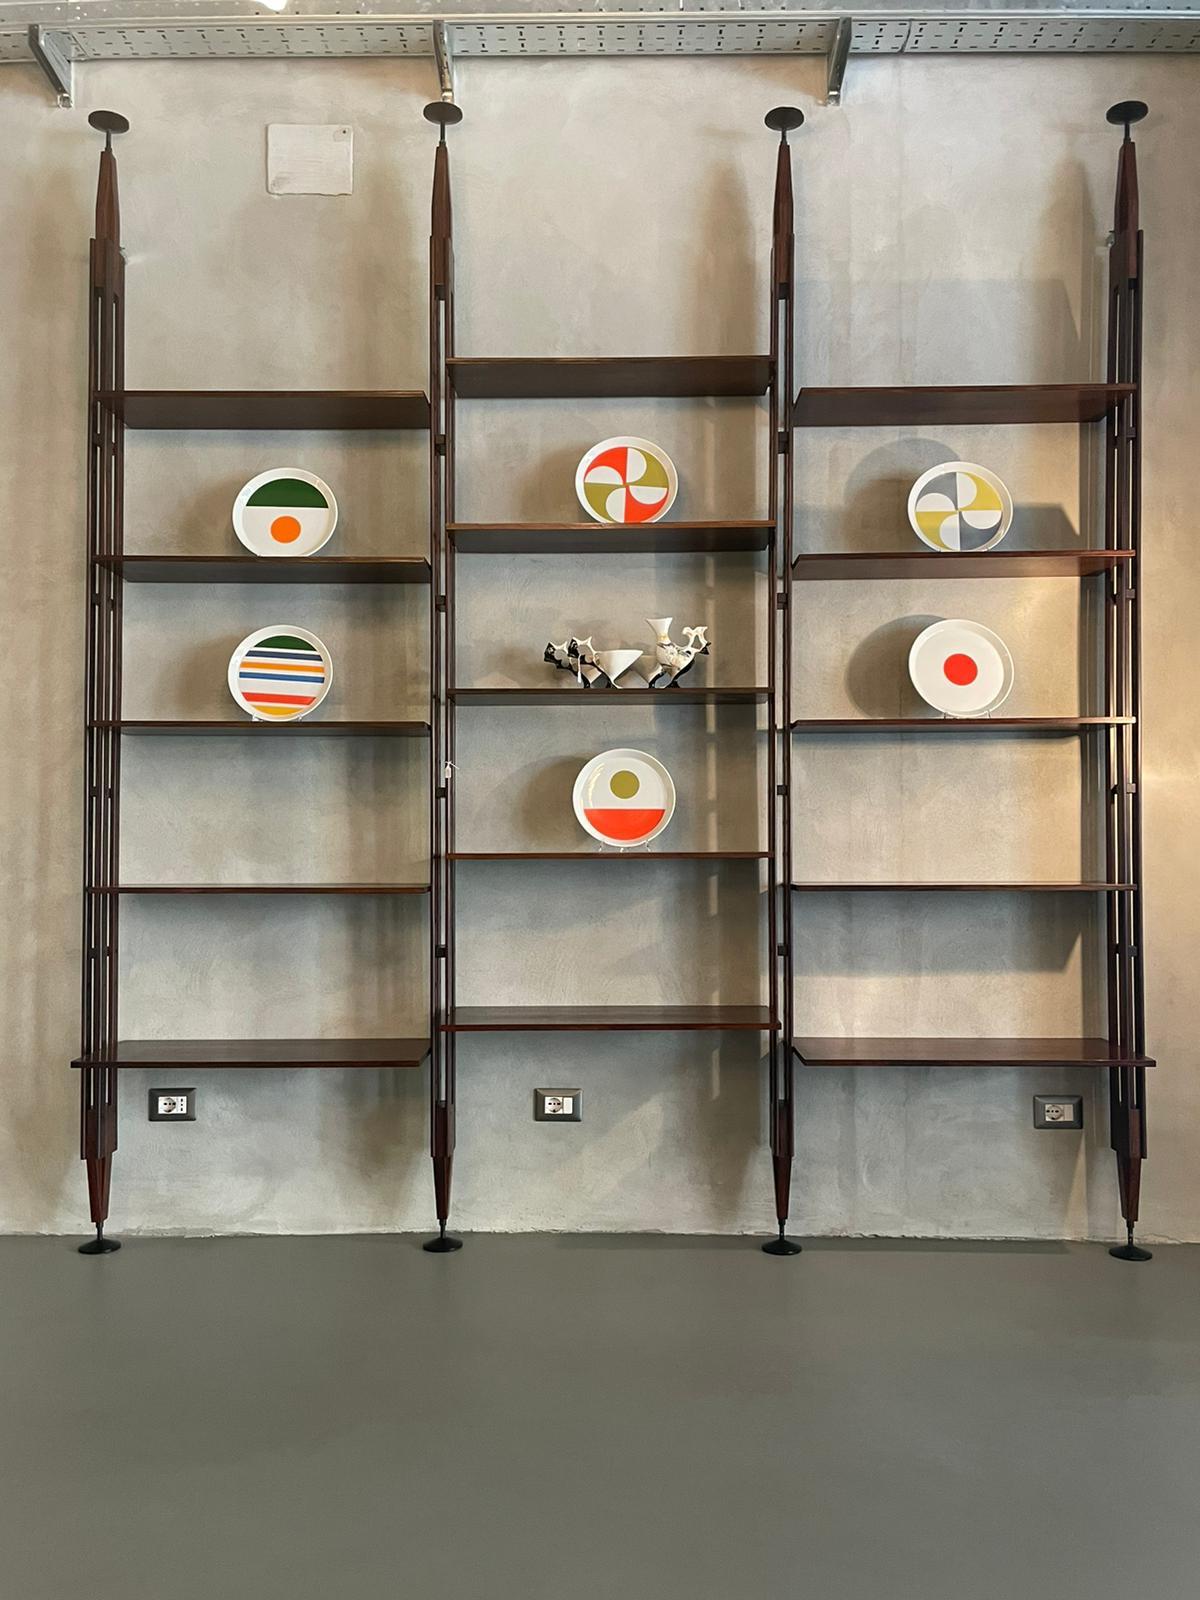 LB7 bookcase designed by Franco Albini for Poggi in Italy, 1950s. 
Bookcase is in rosewood and consists of three sections.
Its height is adjustable from 286 to 310 cm.
The shelves can be freely adjusted on the various levels.
Superior base and the